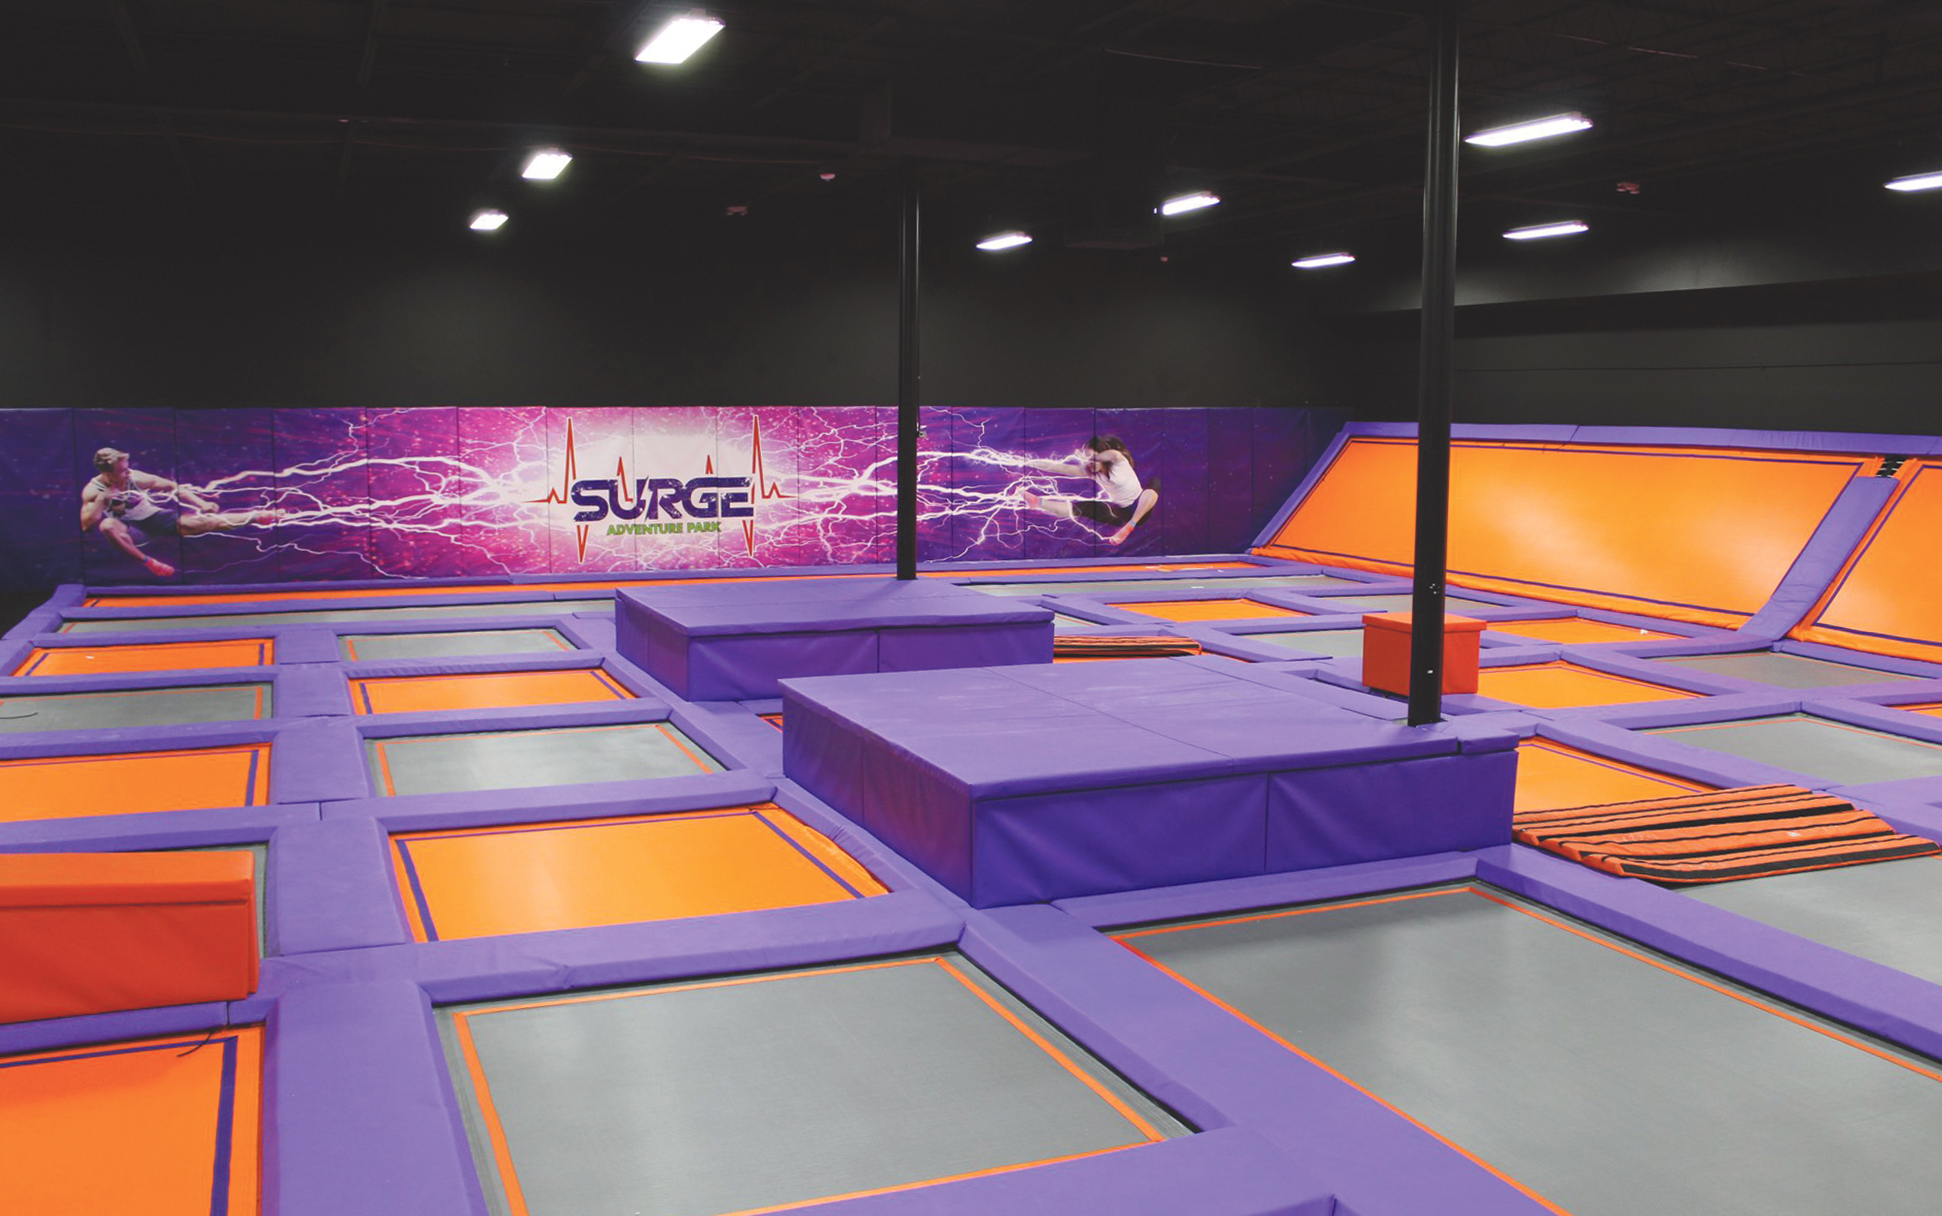 Surge Adventure Park will feature trampolines, a ninja course, zip lines, party rooms and more.